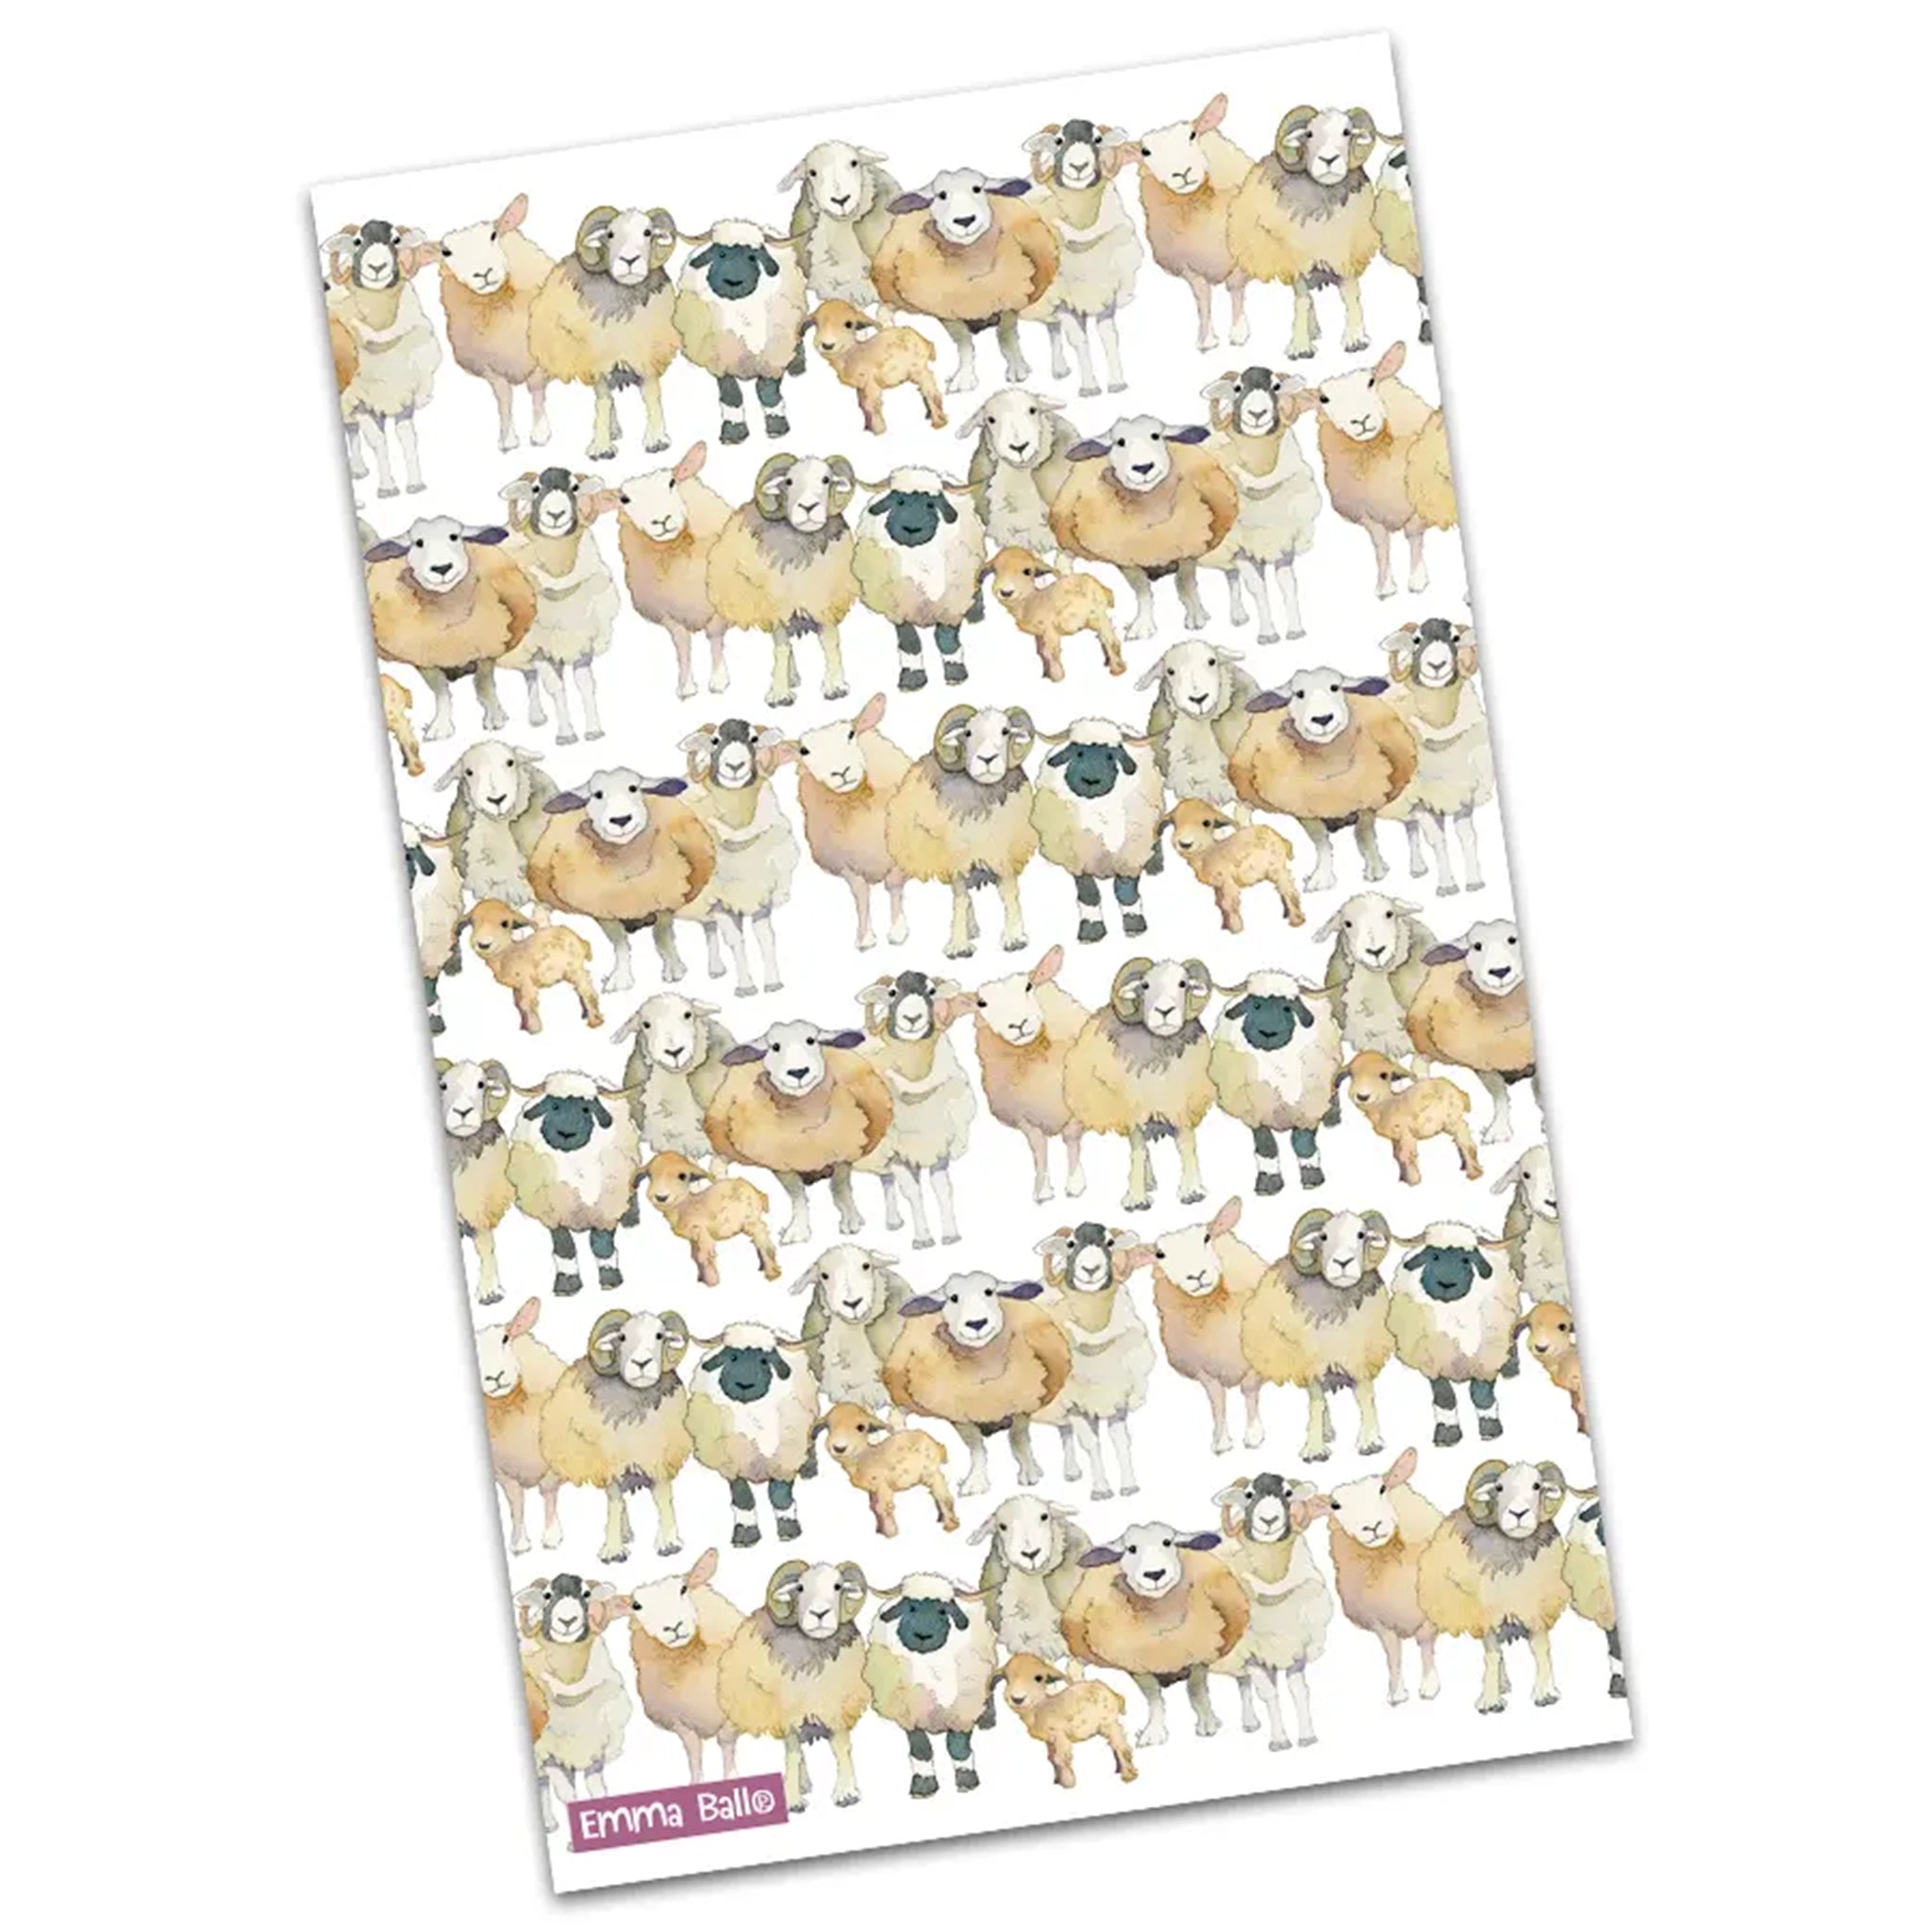 A white tea towel featuring a repeat pattern of sheep illustrations